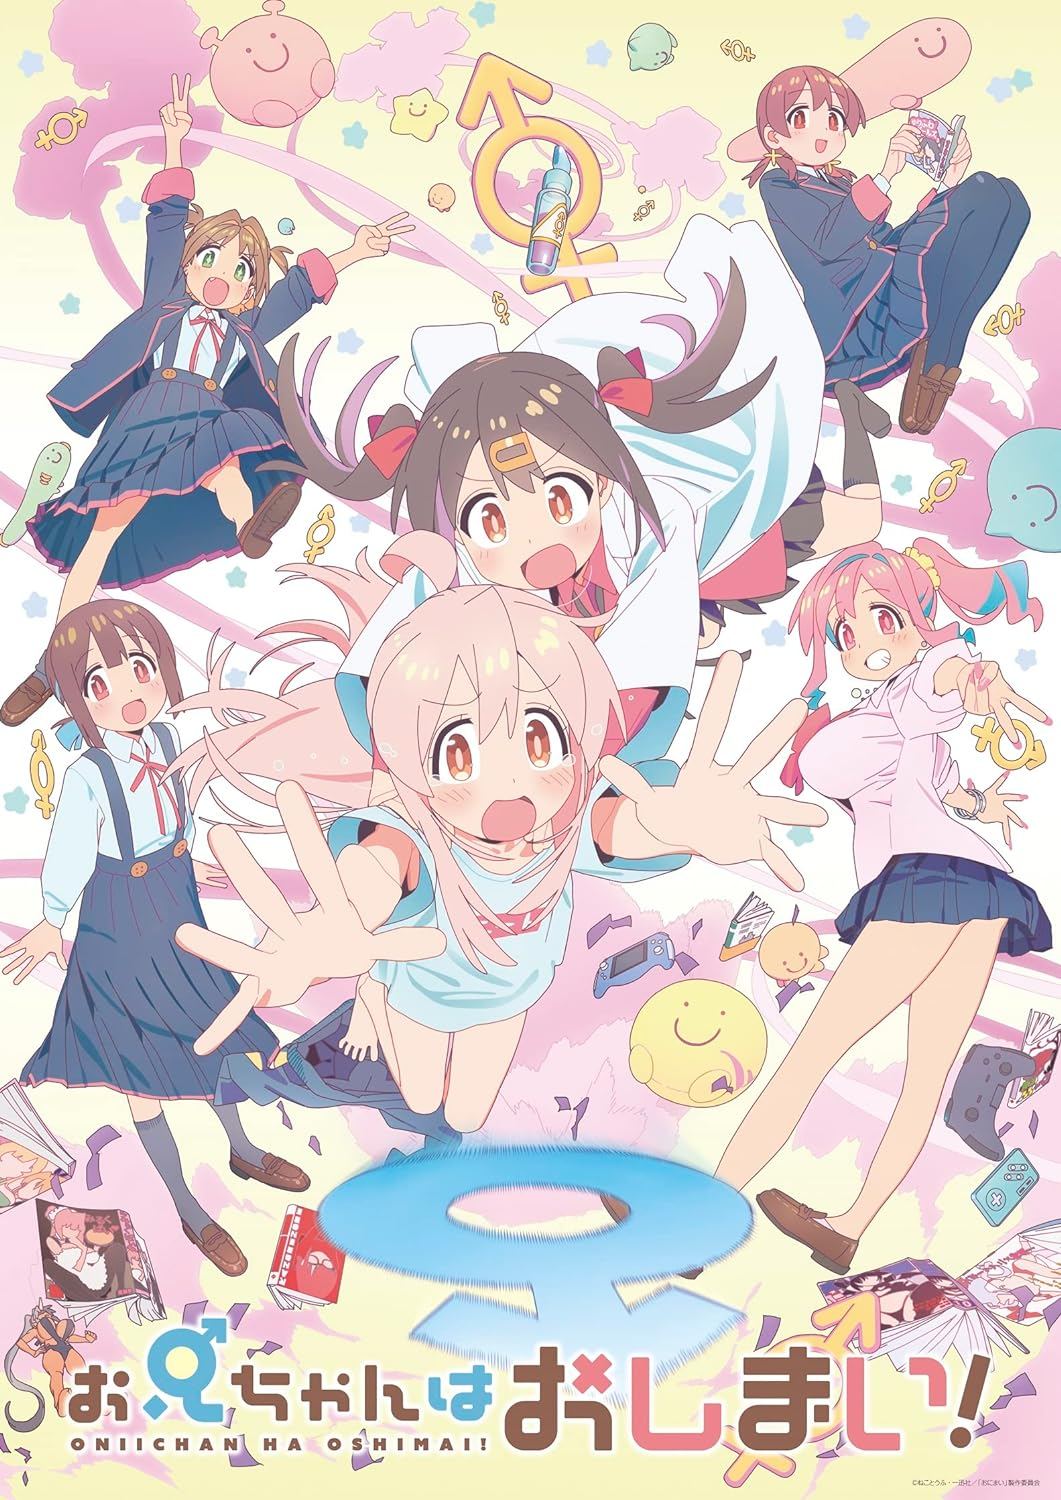 Onii-chan Is Over! Blu-ray Box Volume 2